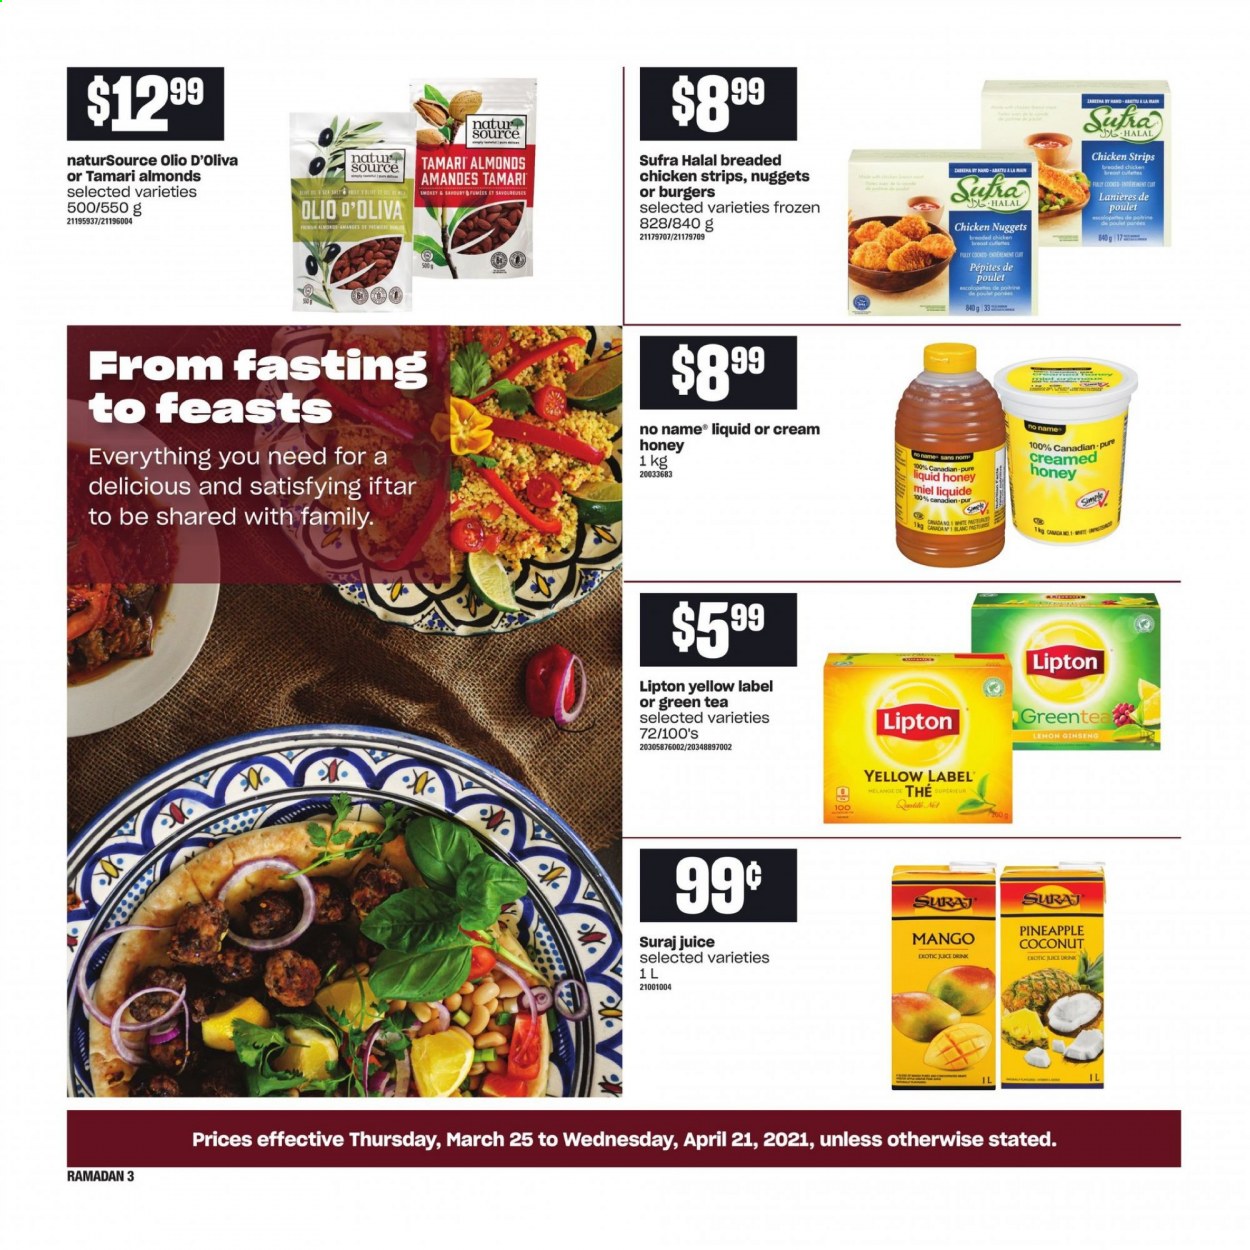 Atlantic Superstore flyer  - March 25, 2021 - April 21, 2021. Page 3.